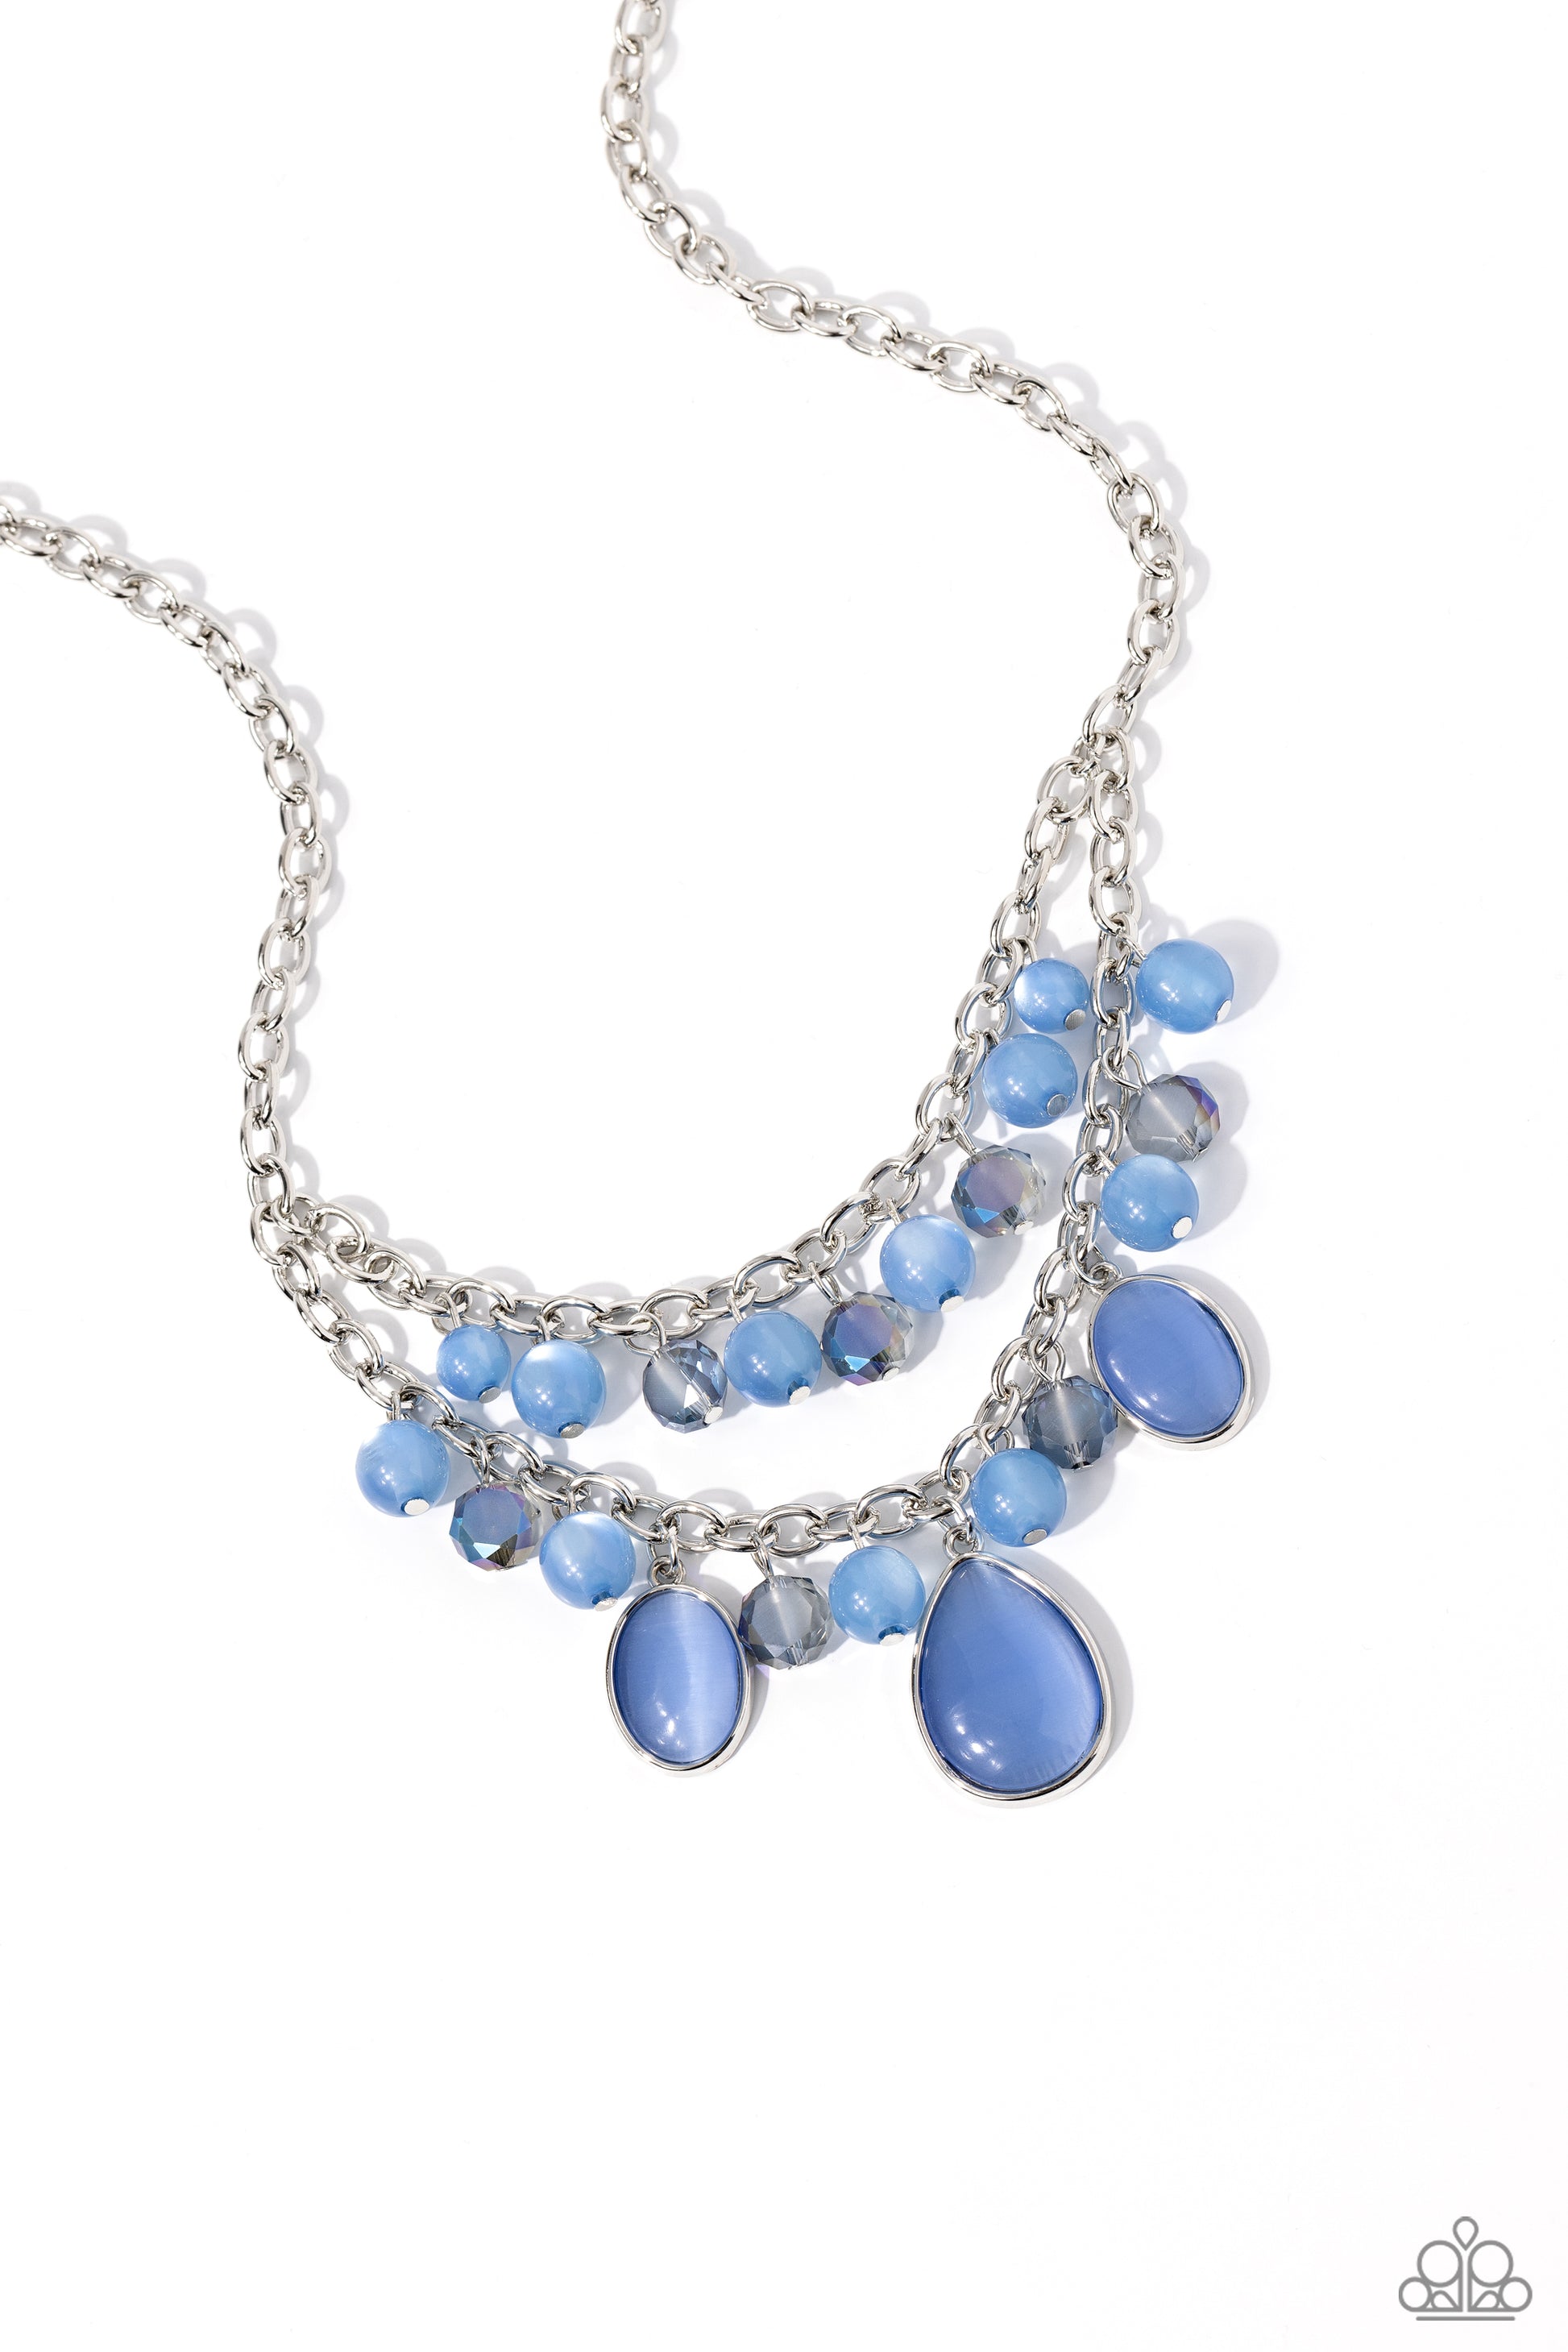 Dewy Disposition - blue - Paparazzi necklace – JewelryBlingThing